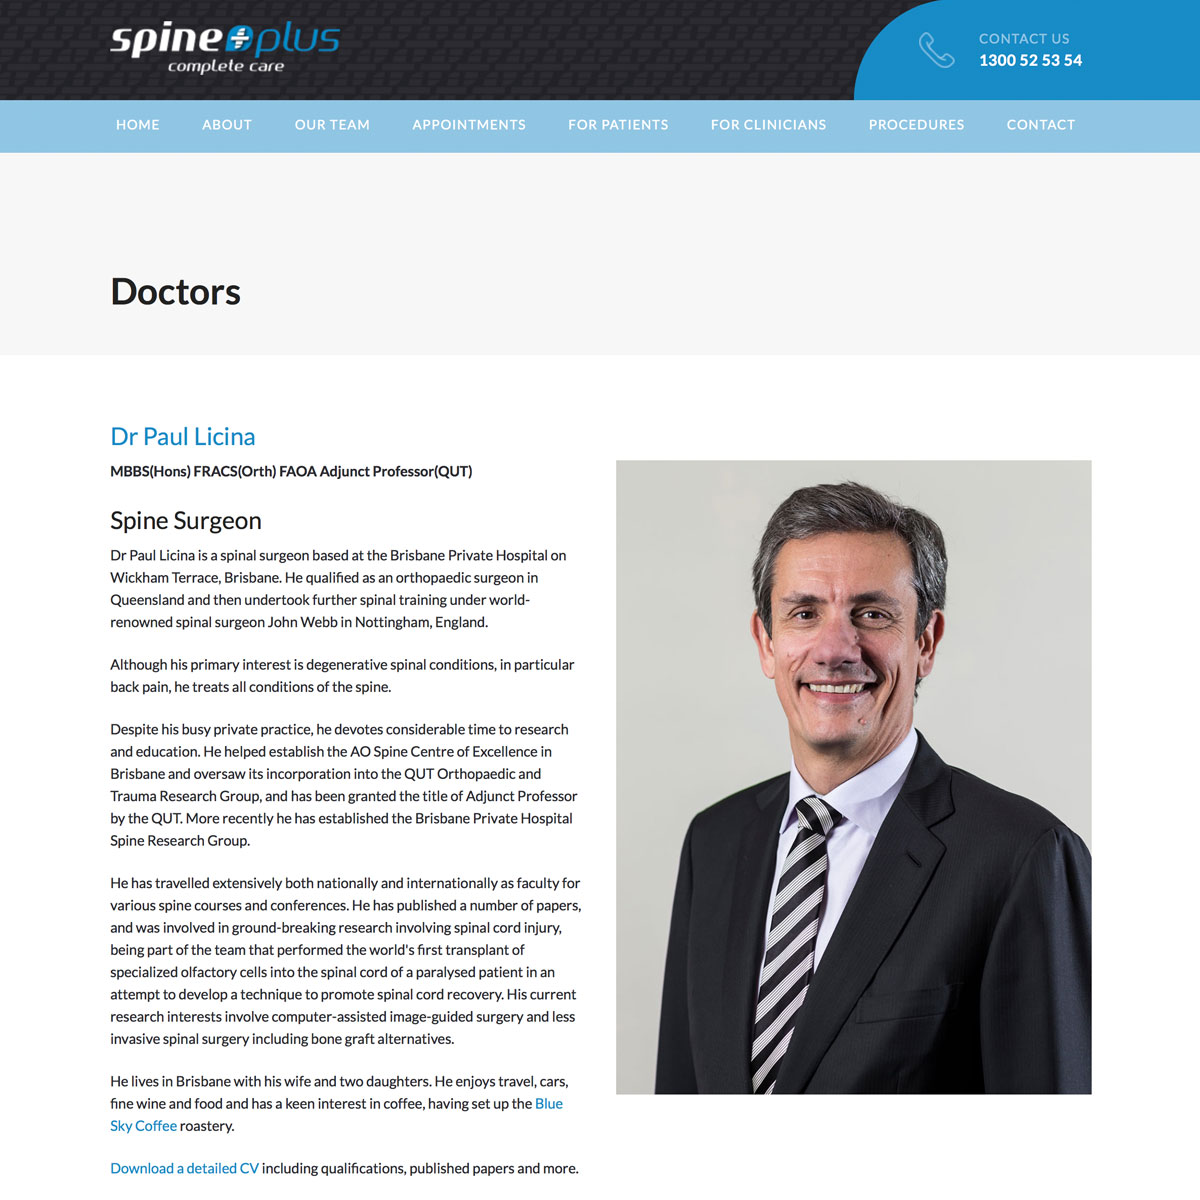 SpinePlus - Dr Paul Licina